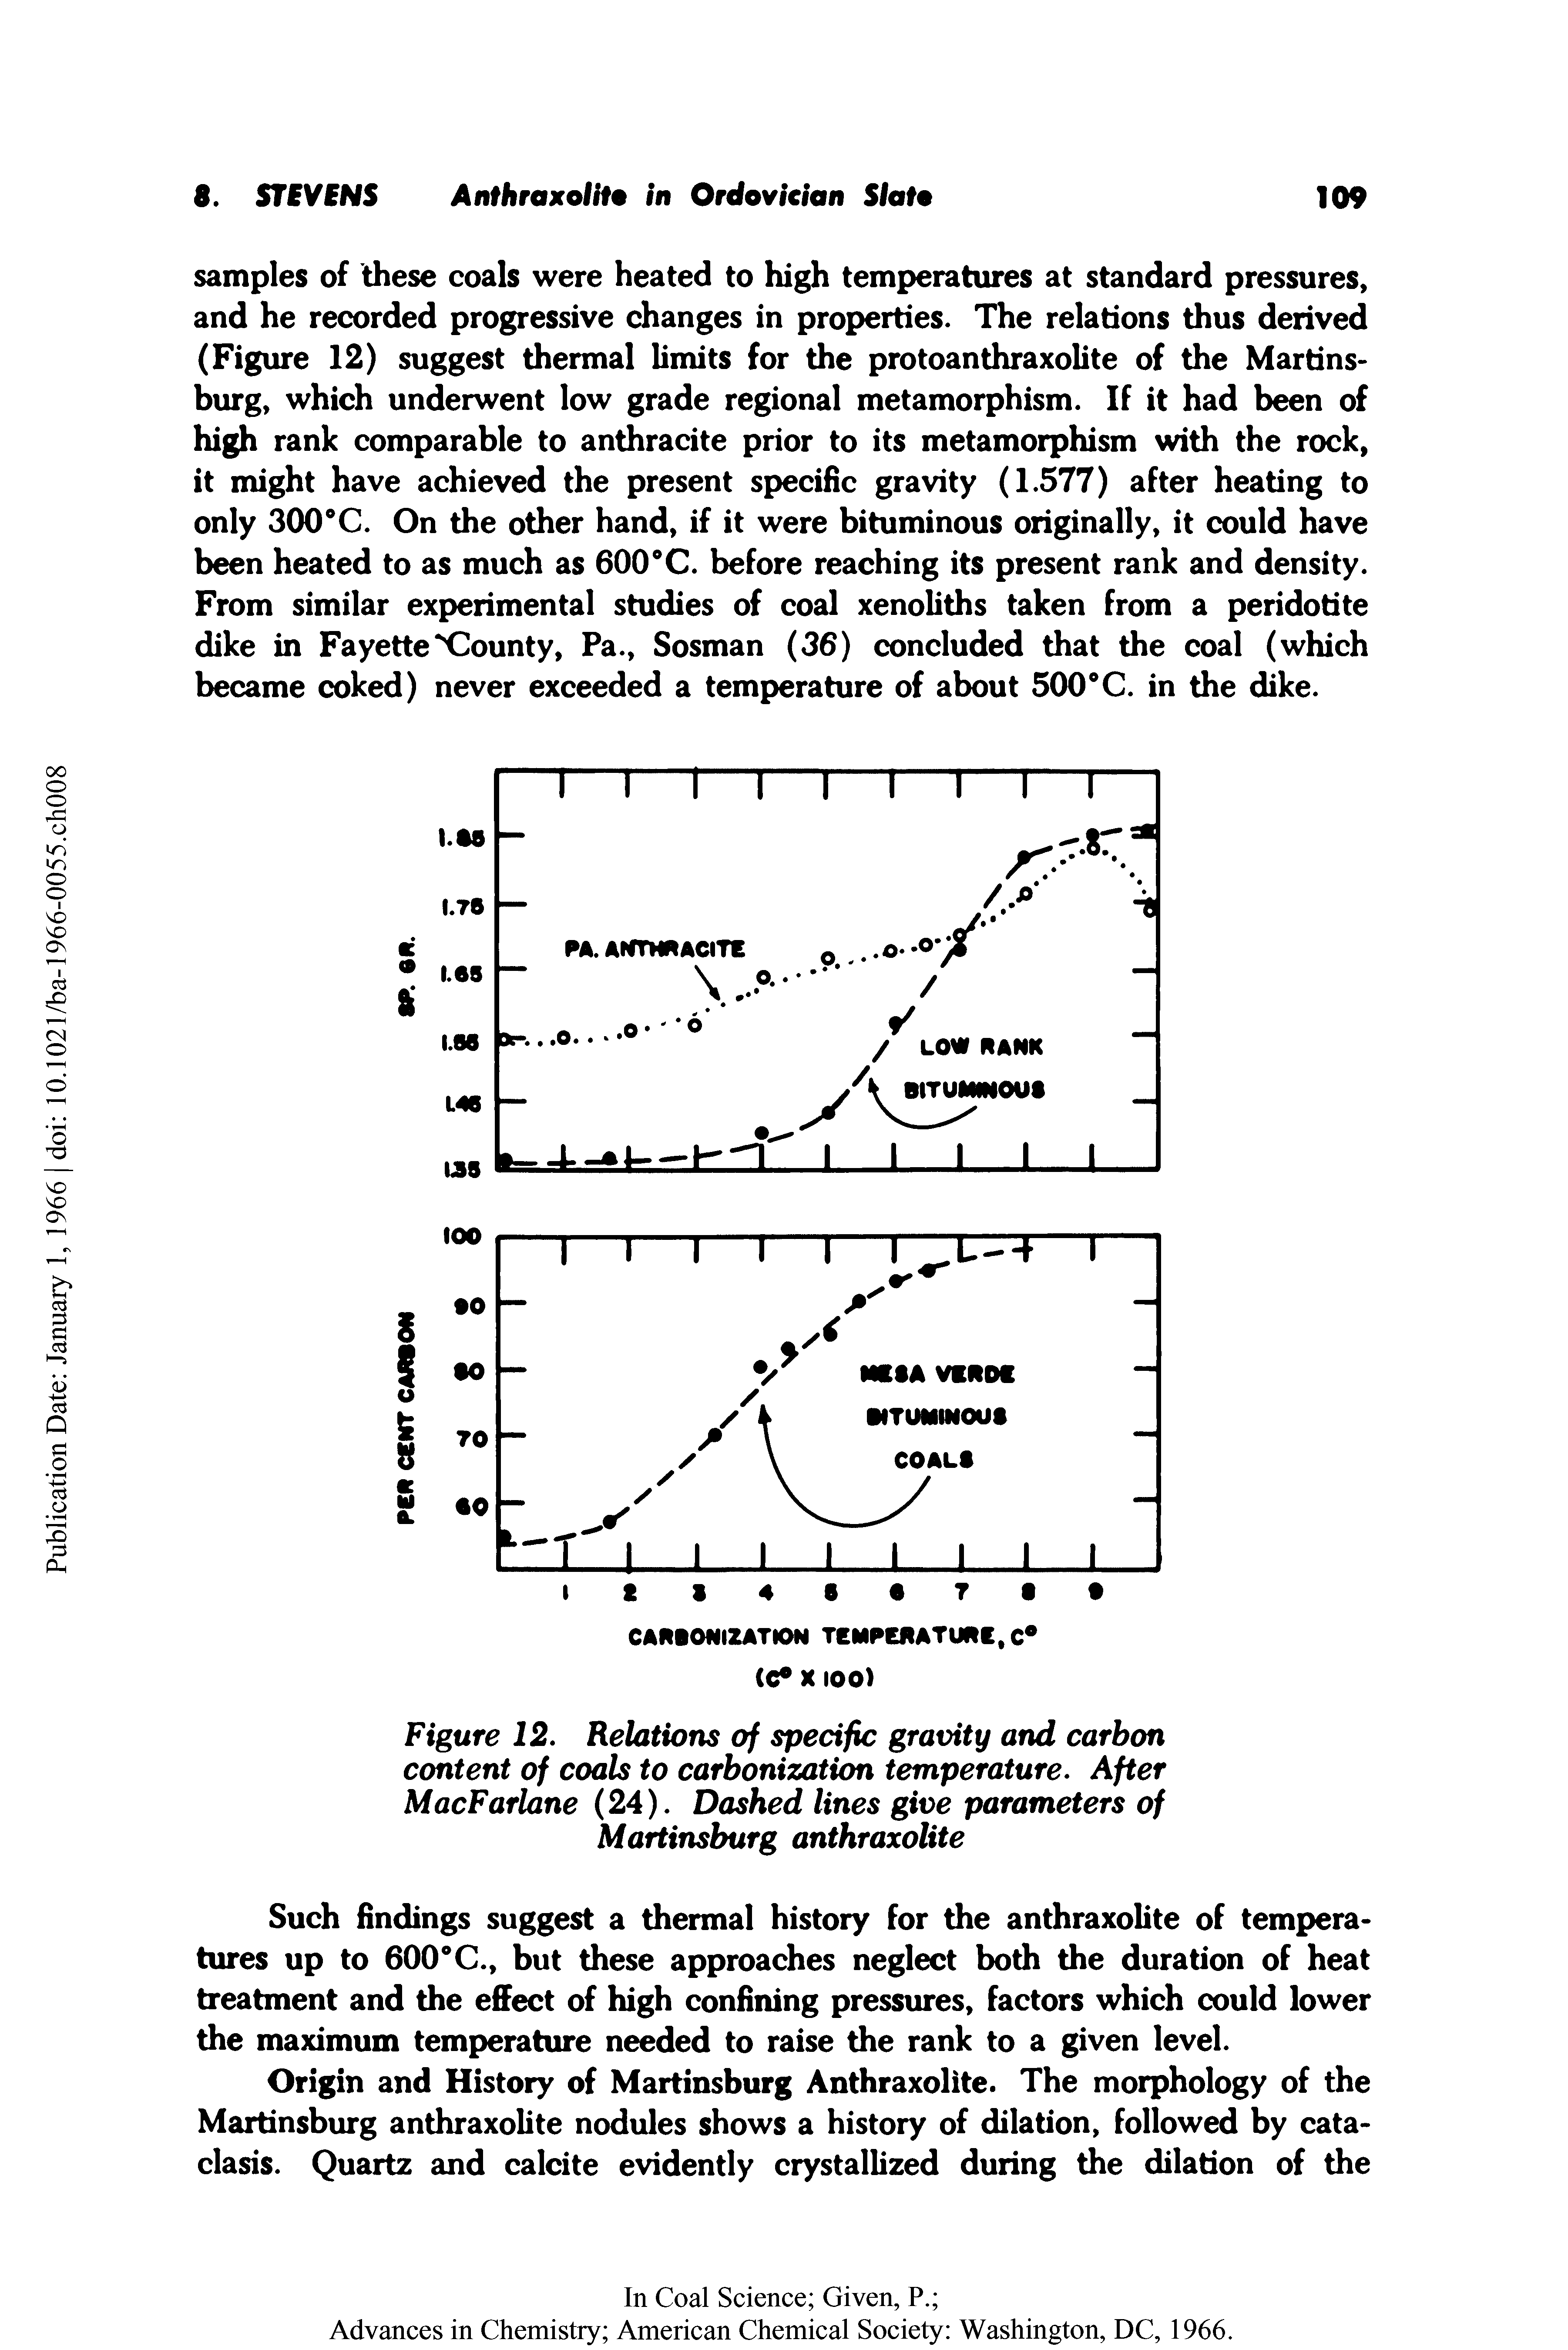 Figure 12. Relations of specific gravity and carbon content of coals to carbonization temperature. After MacFarlane (24). Dashed lines give parameters of Martinsburg anthraxolite...